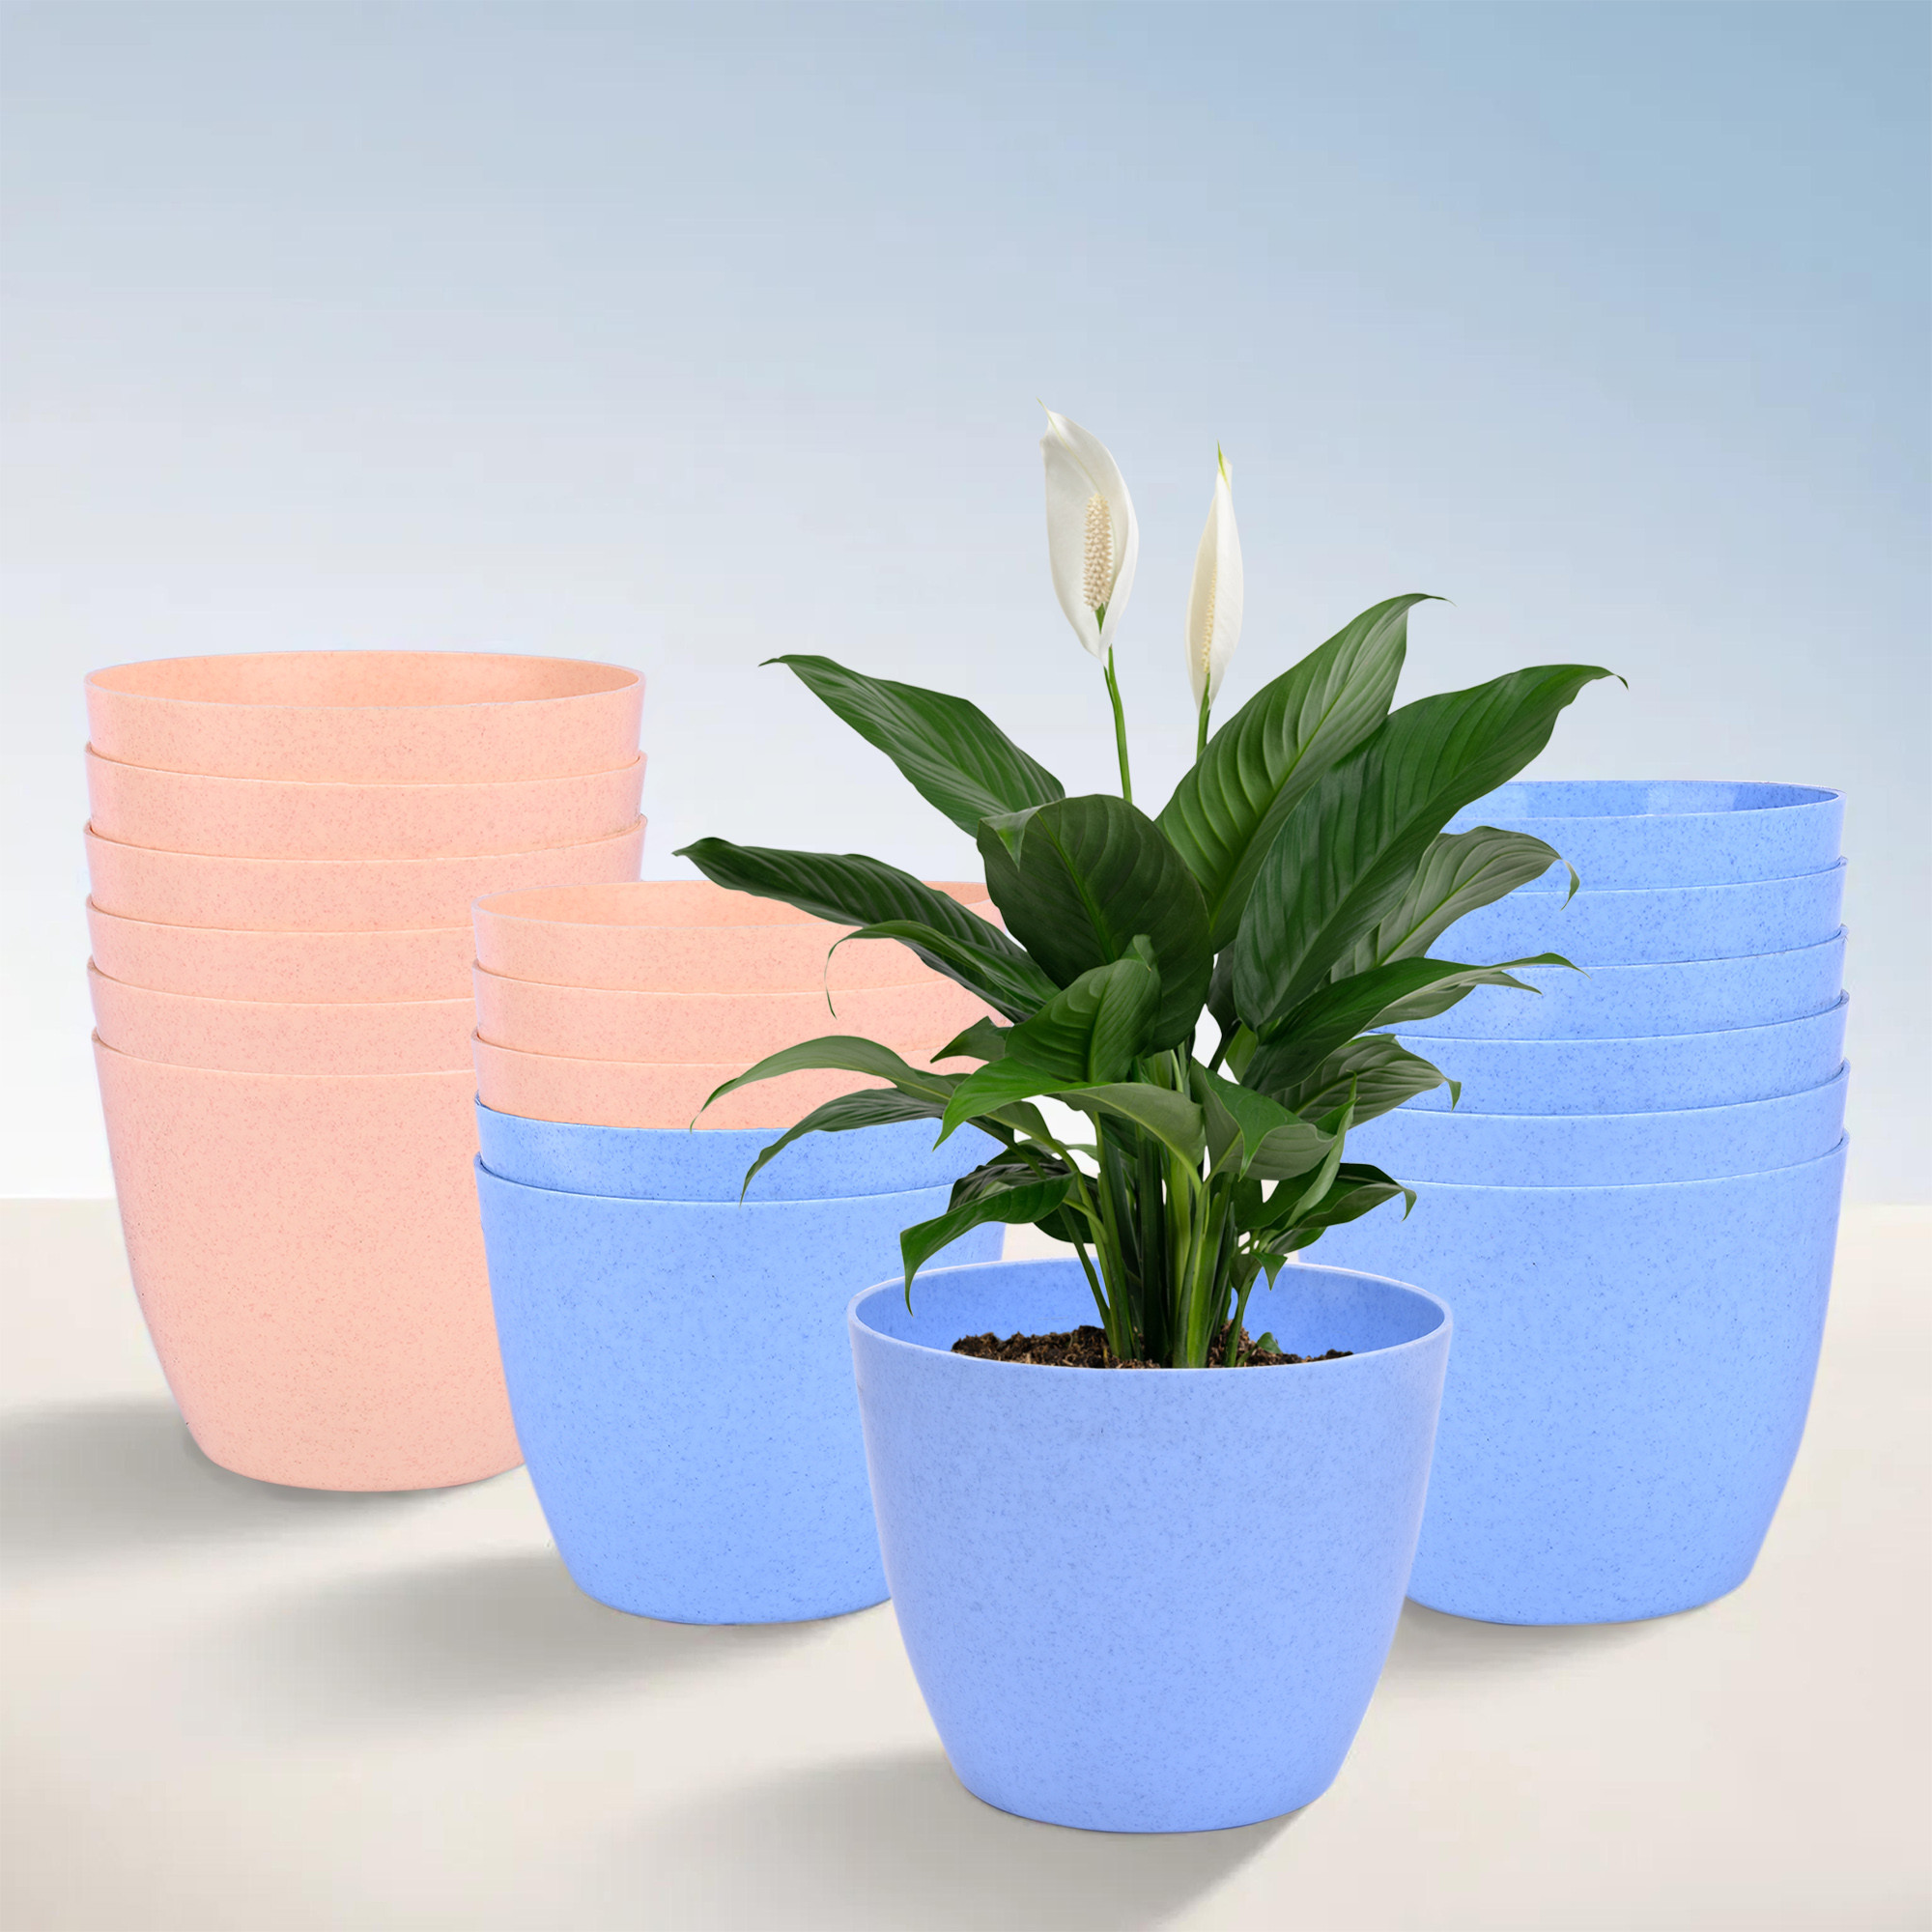 Kuber Industries Flower Pot | Flower Pot for Living Room-Office | Flower Planters for Home-office-Lawns & Garden Décor | Planters Pots for Balcony | Marble Cool | 5 Inch | Blue & Peach